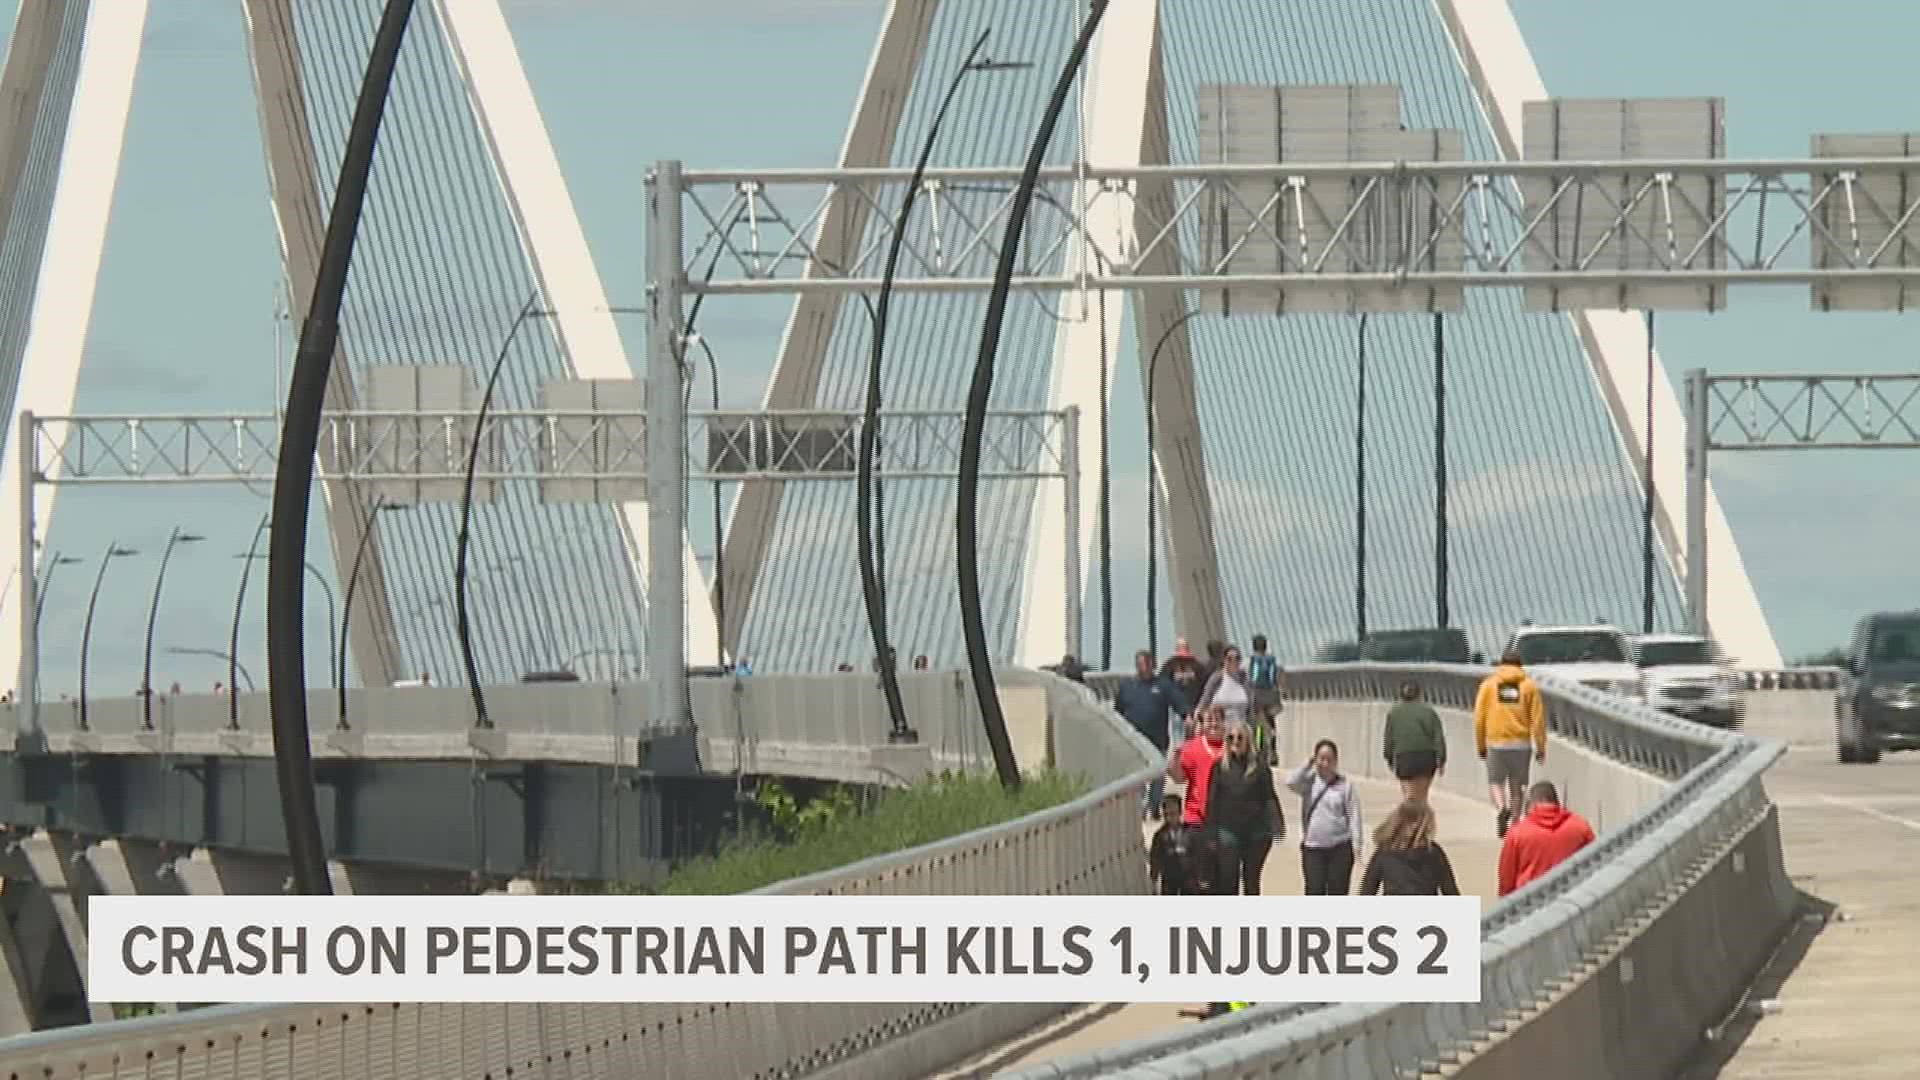 A person is in custody after driving onto the I-74 bridge pedestrian path and striking three people.